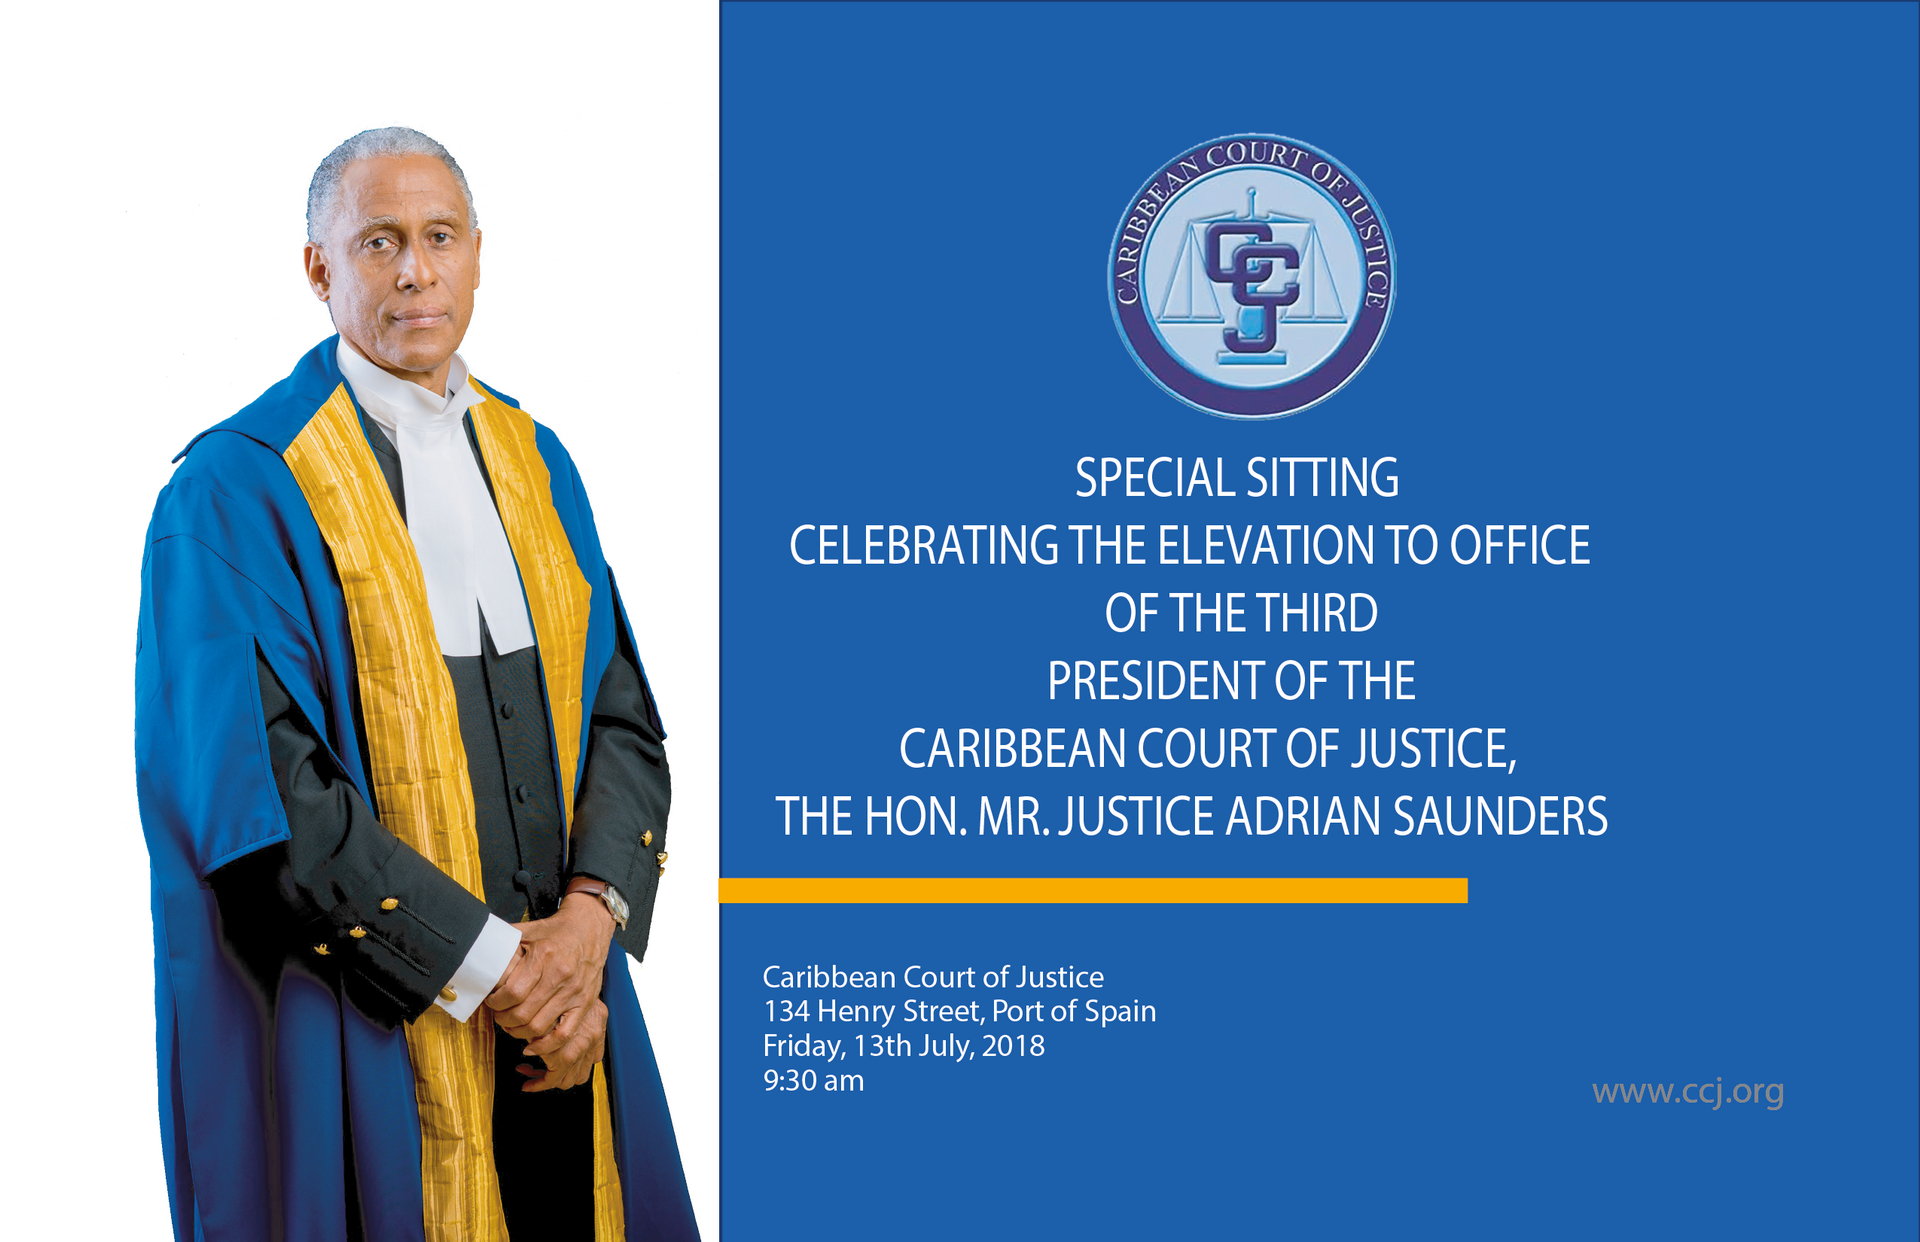 Special Sitting Celebrating the Elevation to Office of the CCJ's 3rd President